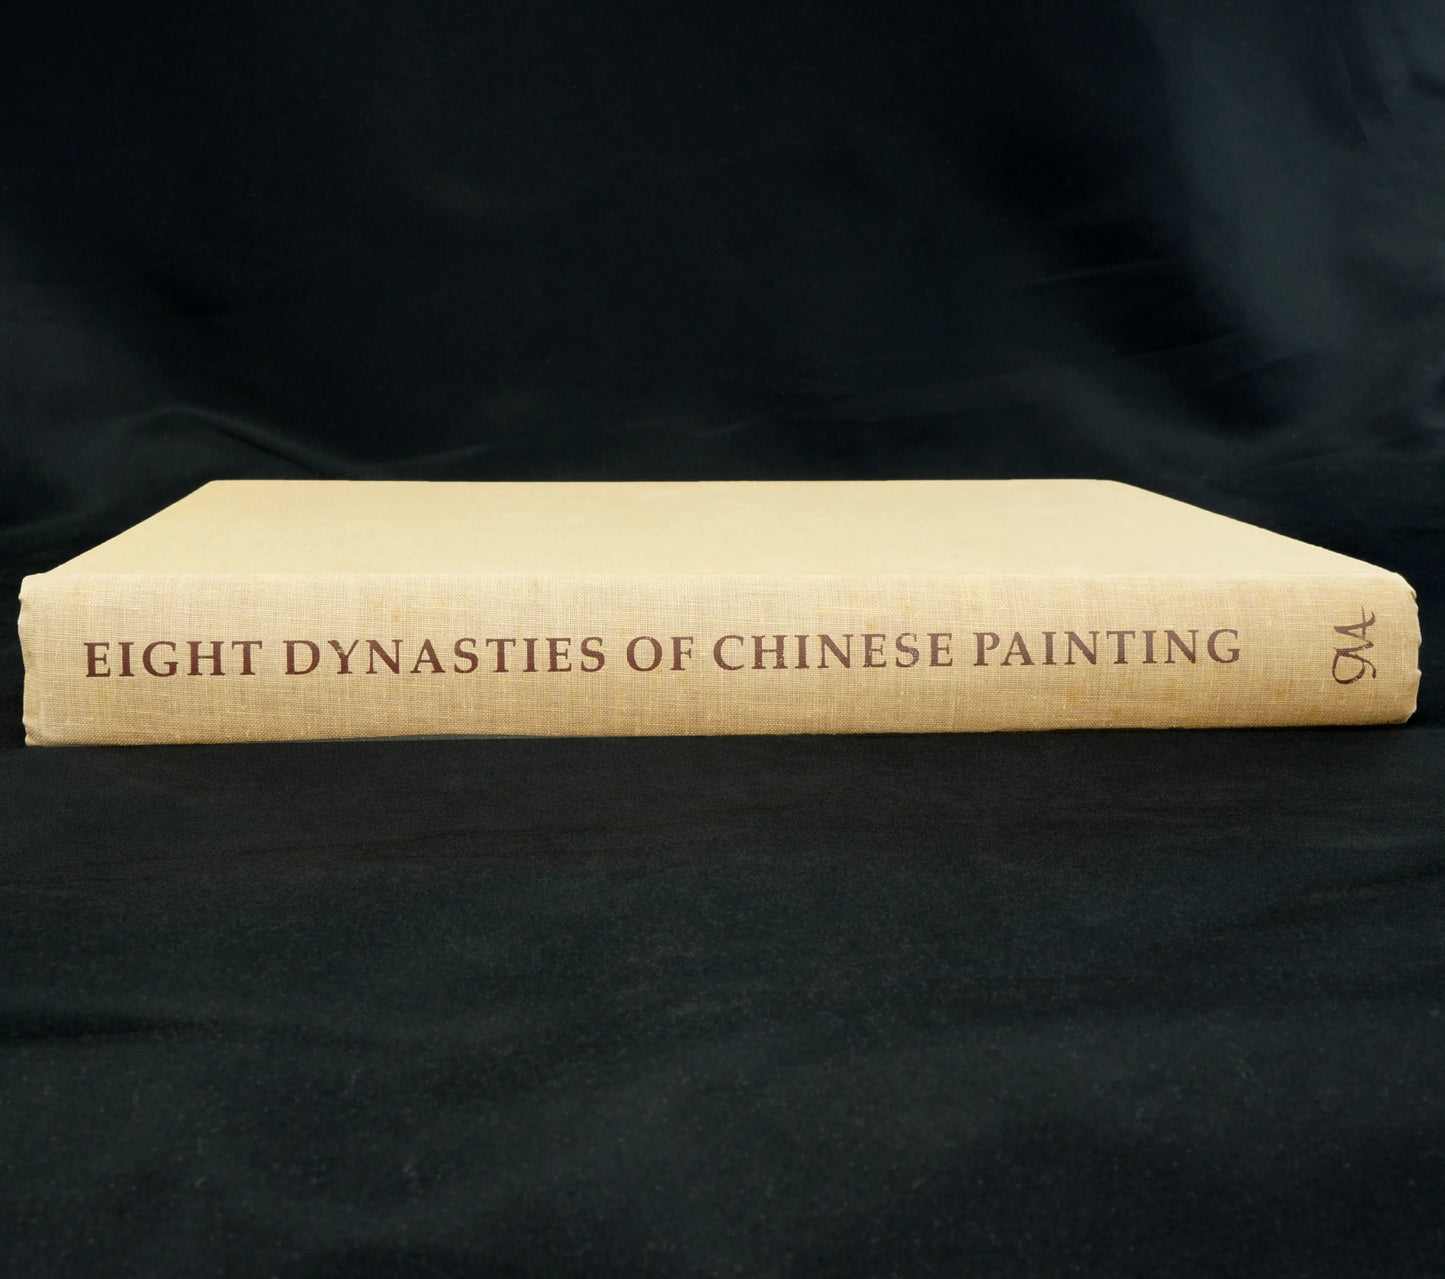 Eight Dynasties of Chinese Painting – Cleveland Museum of Art - Bear and Raven Antiques